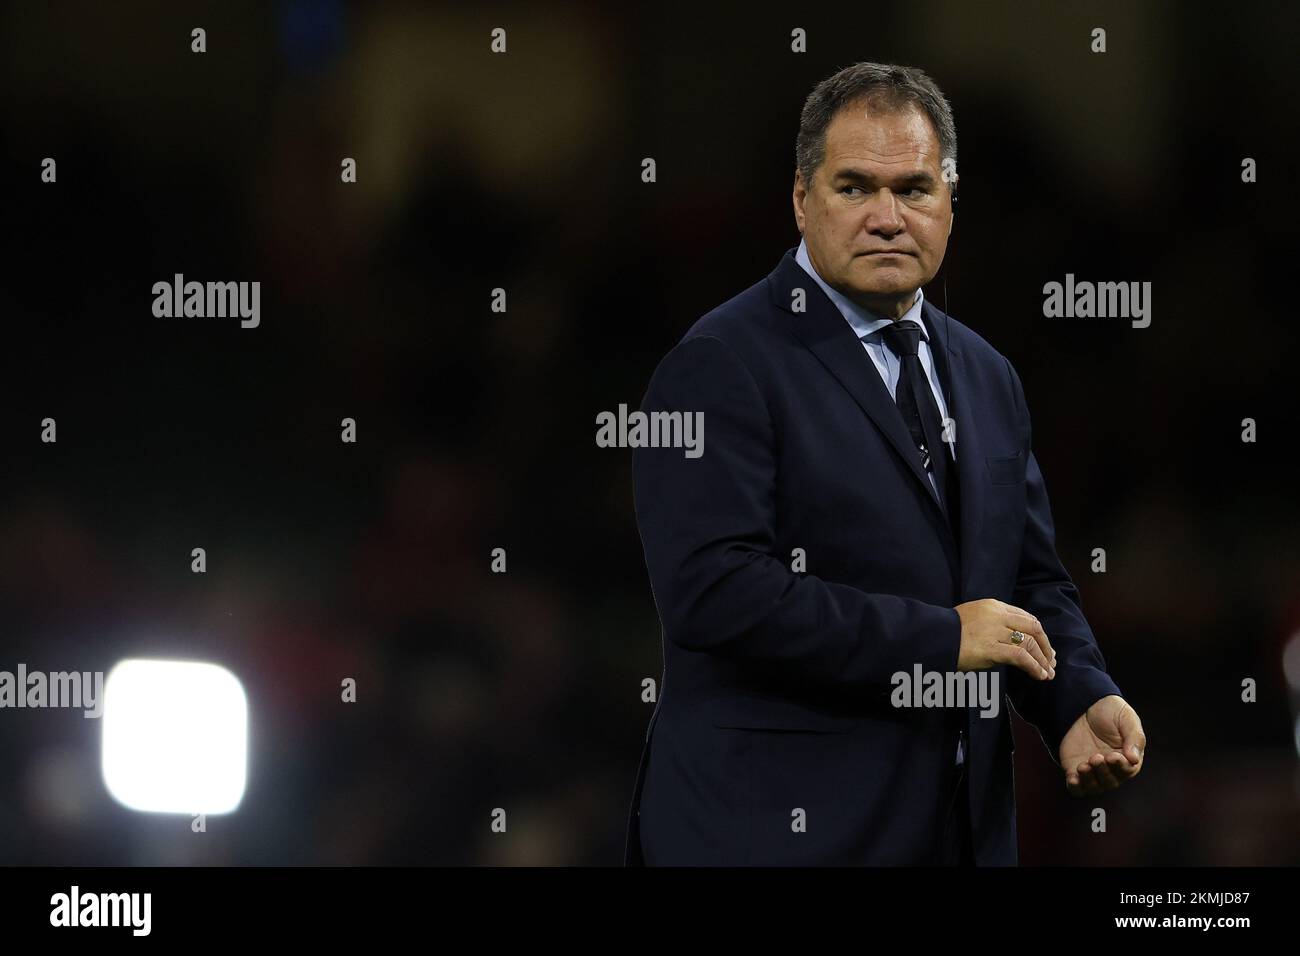 Cardiff, UK. 26th Nov, 2022. Dave Rennie, the head coach of Australia rugby union team looks on before the game. Autumn nations series 2022 rugby match, Wales v Australia at the Principality Stadium in Cardiff on Saturday 26th November 2022. pic by Andrew Orchard/Andrew Orchard sports photography/Alamy Live News Credit: Andrew Orchard sports photography/Alamy Live News Stock Photo